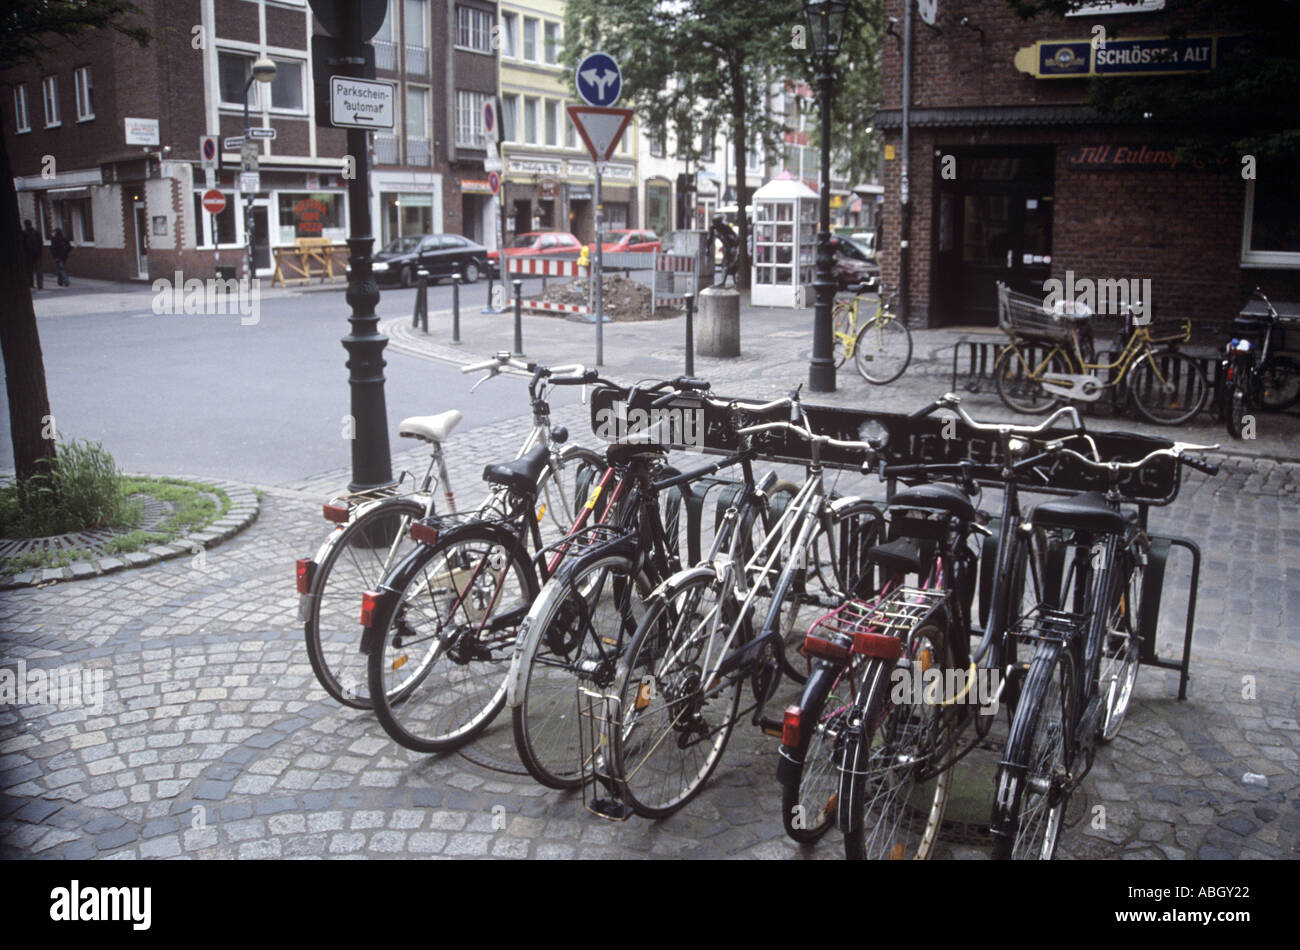 Bicycles parked in altenstadt or old town part of Düsseldorf, Germany Stock Photo